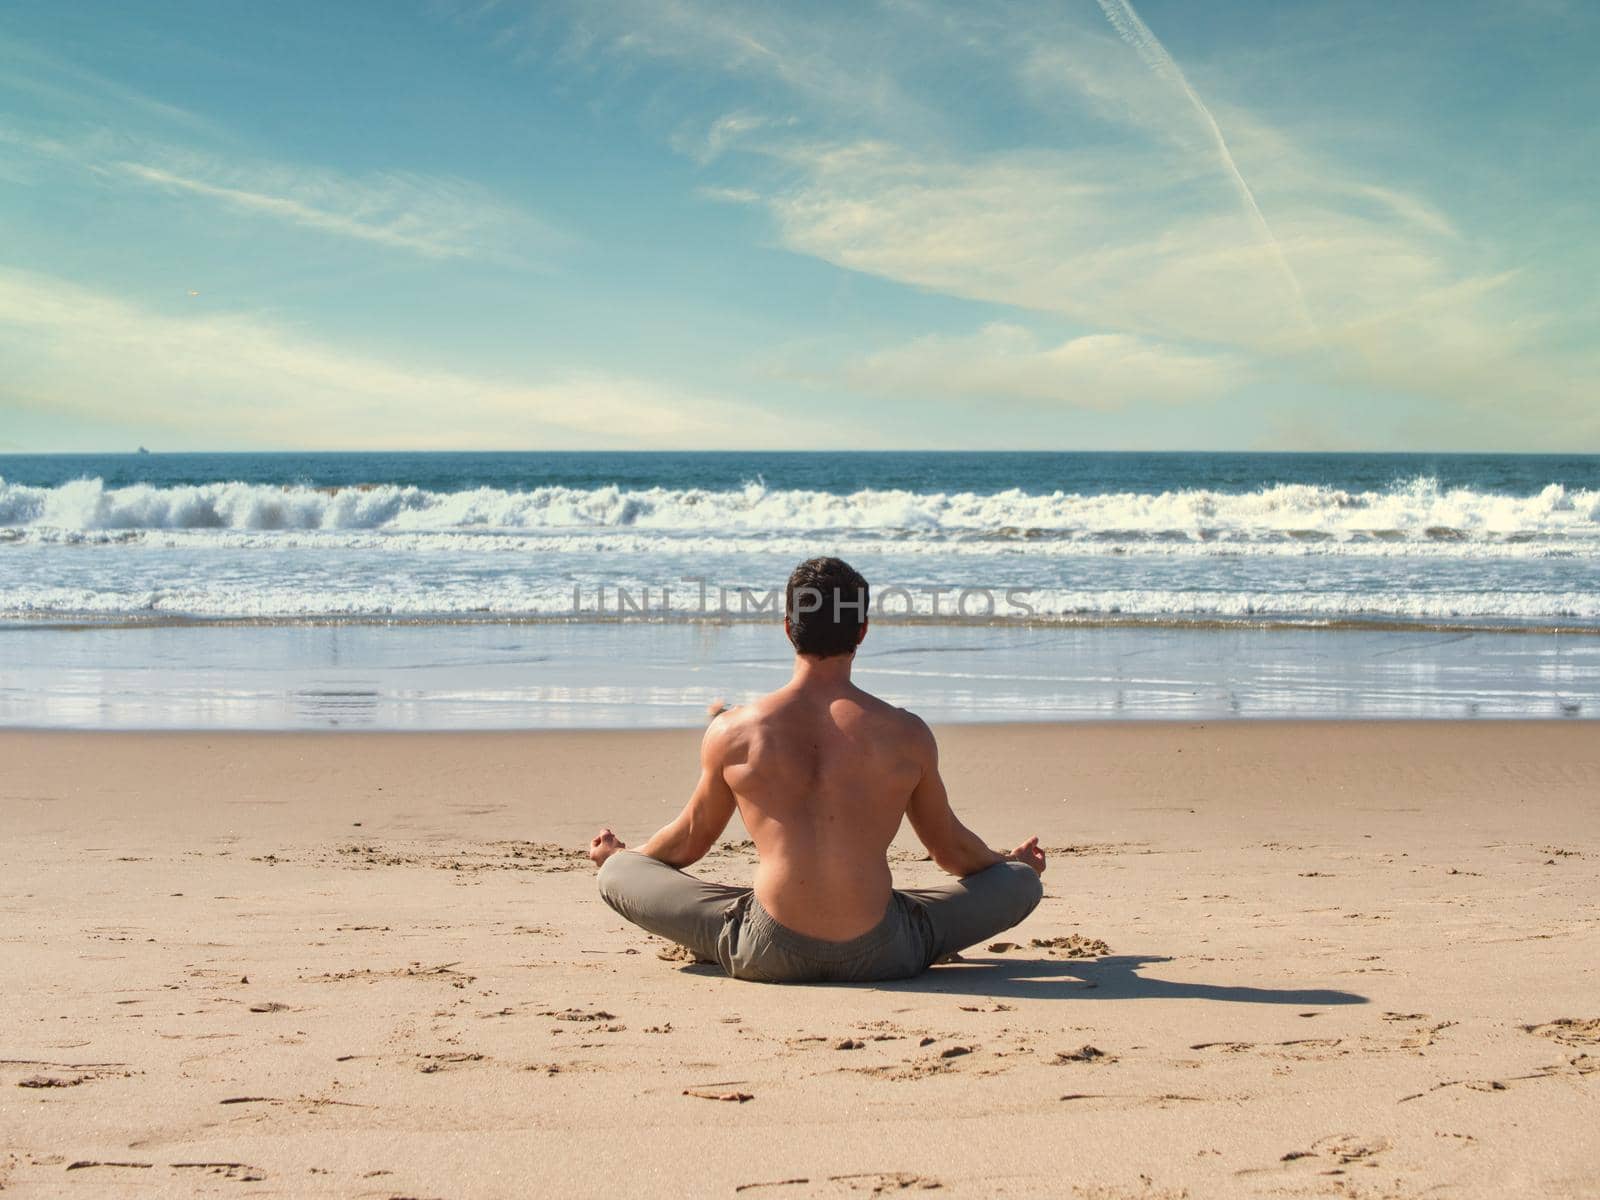 Fit Shirtless Young Man During Meditation or Doing an Outdoor Yoga Exercise Sitting on Rocks by Ocean Shore